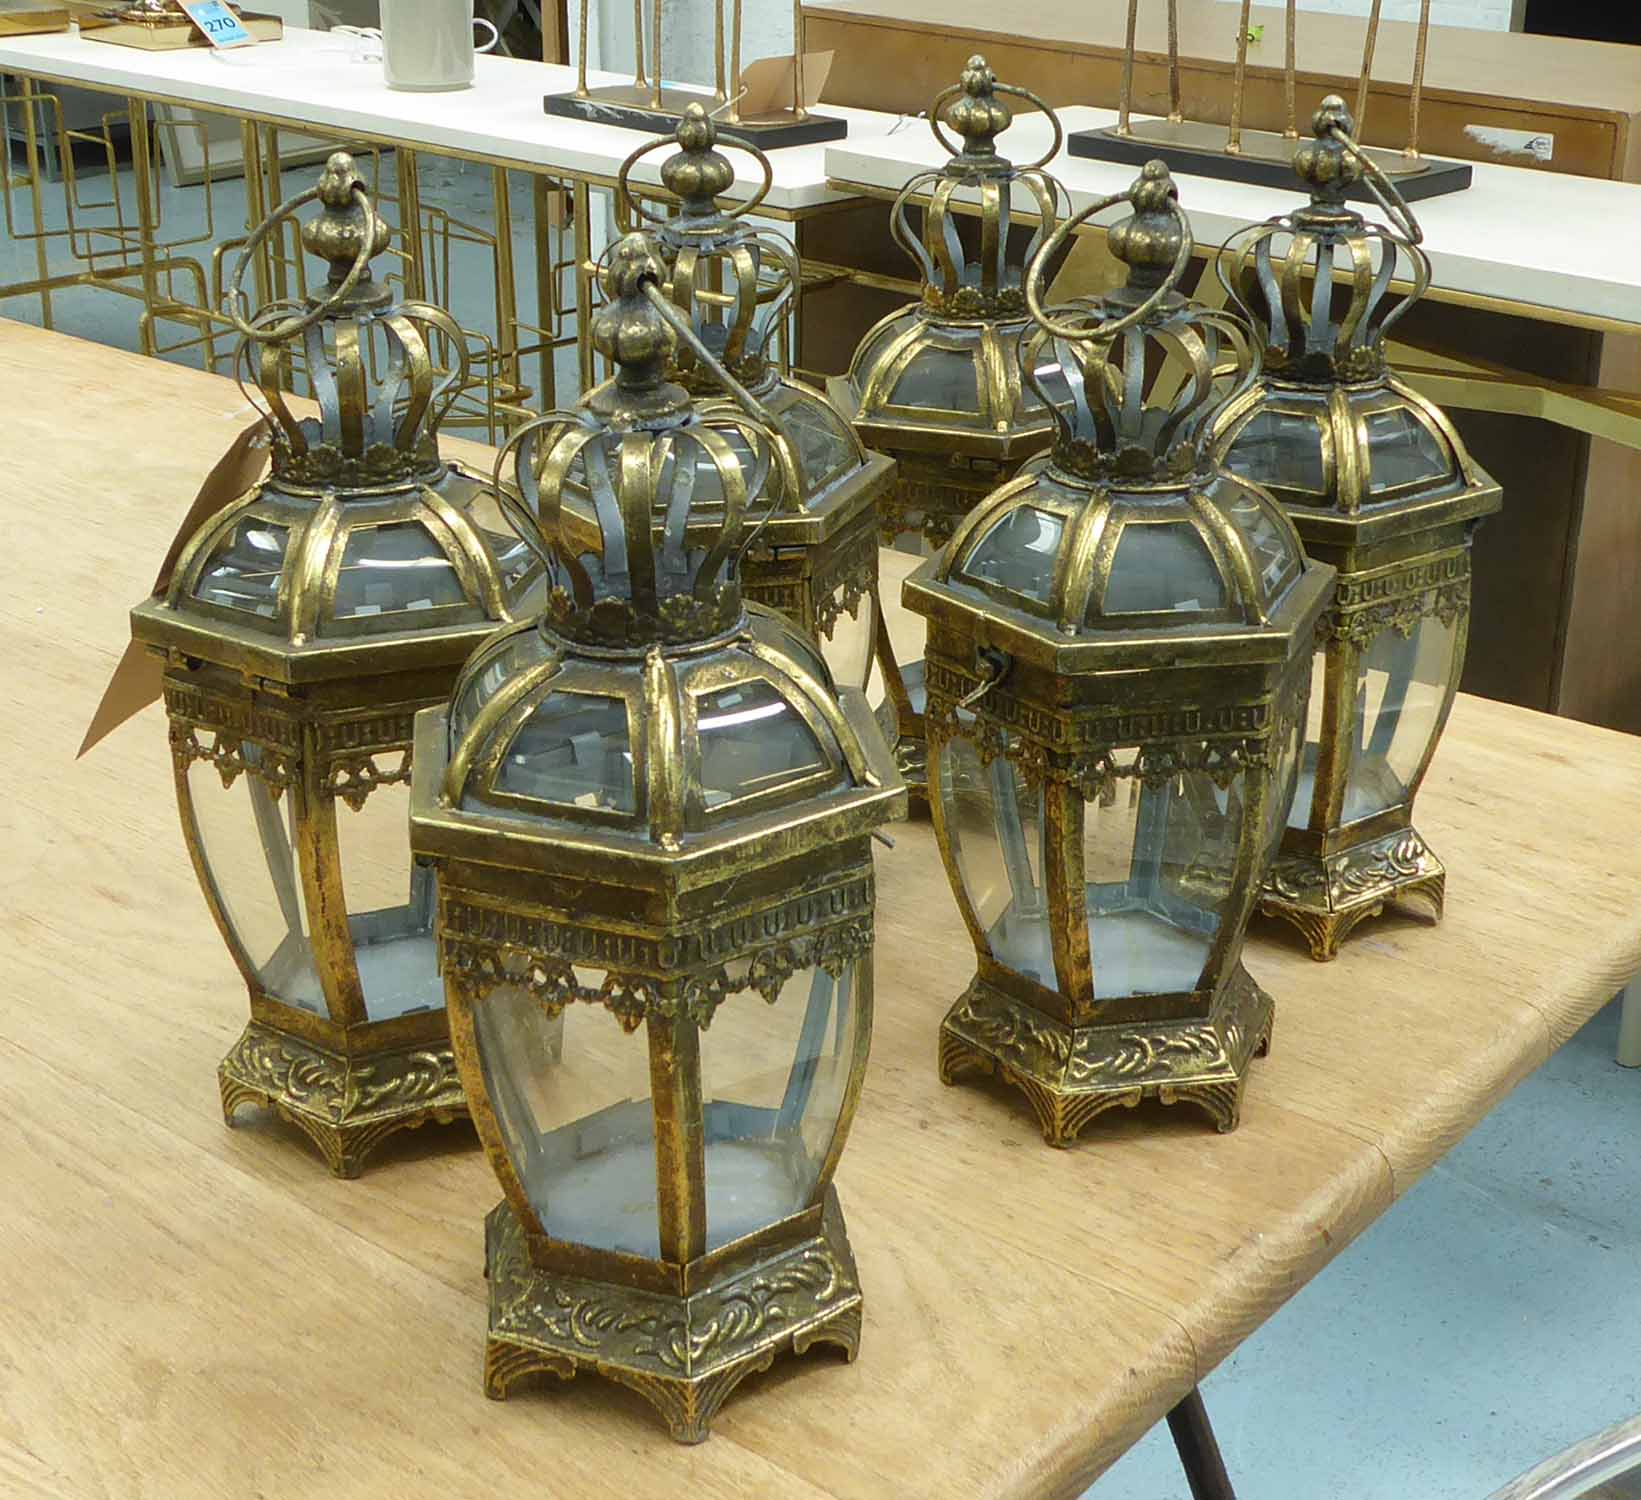 ORANGERY LANTERNS, a set of six, French provincial style, 40cm H.